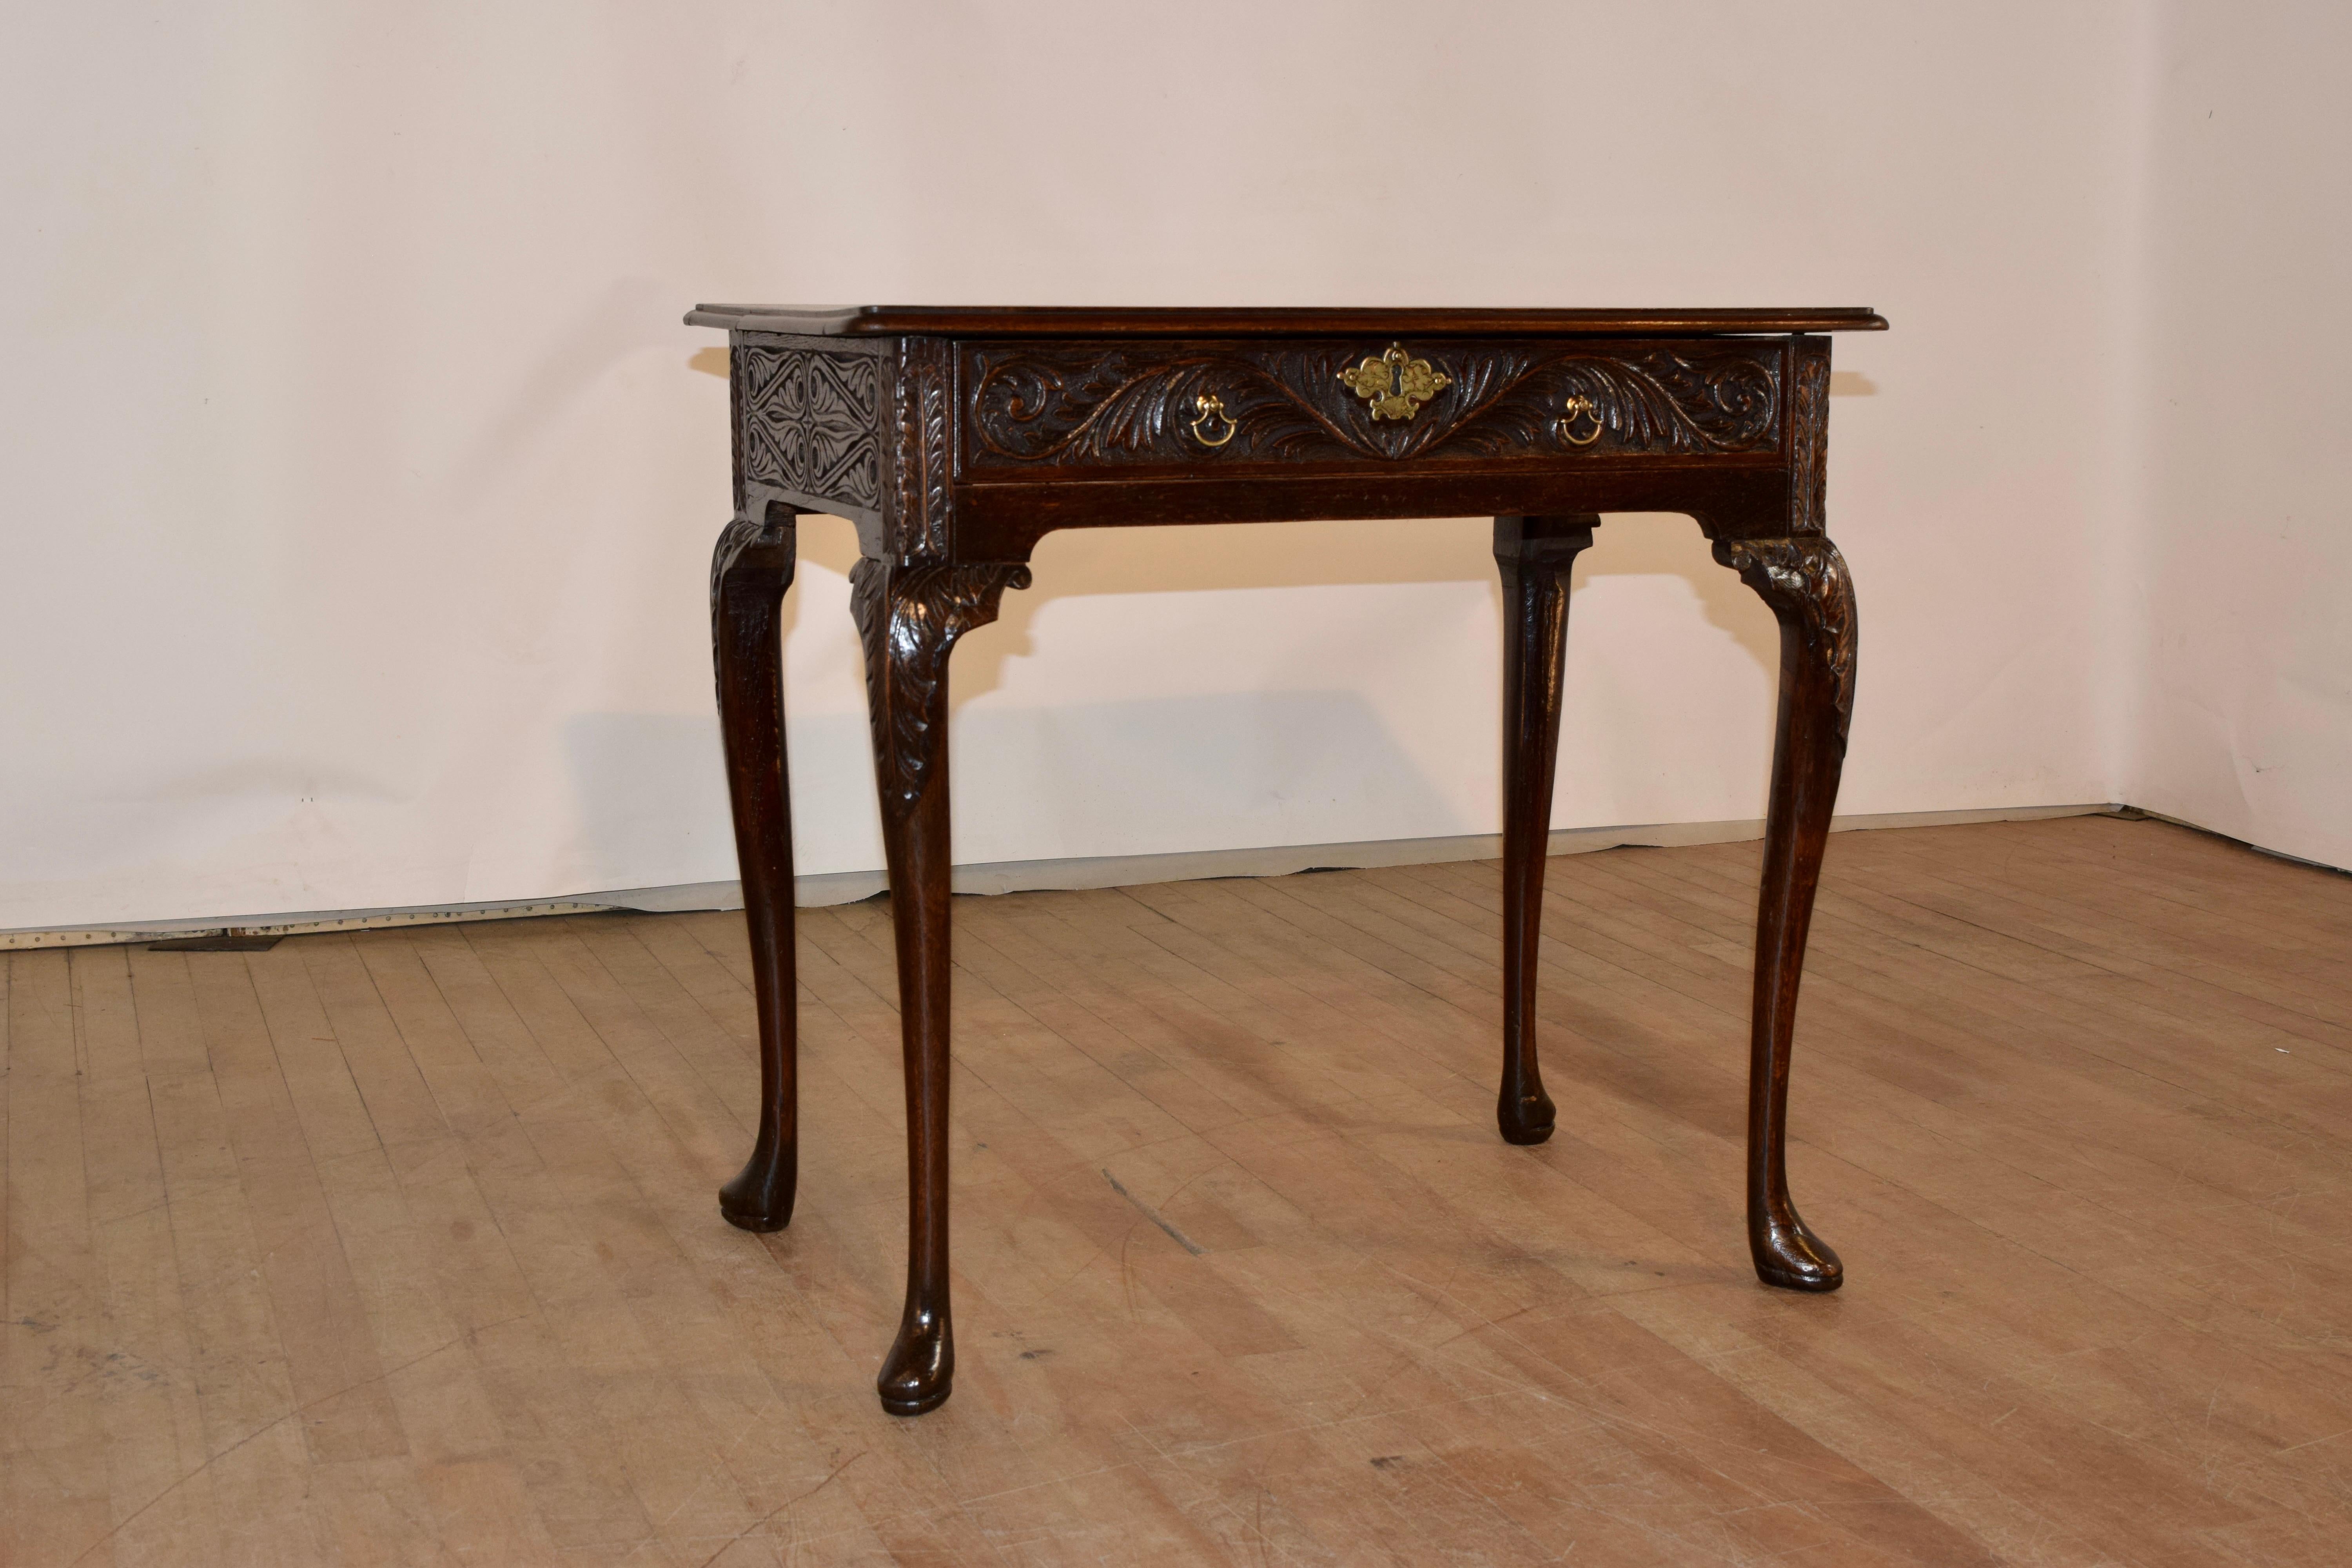 18th Century oak lowboy from England with an Ash top, made from two boards. The top is pegged construction and has a beveled edge, following down to an exquisitely hand carved oak base, with decorated sides and a single drawer in the front, also